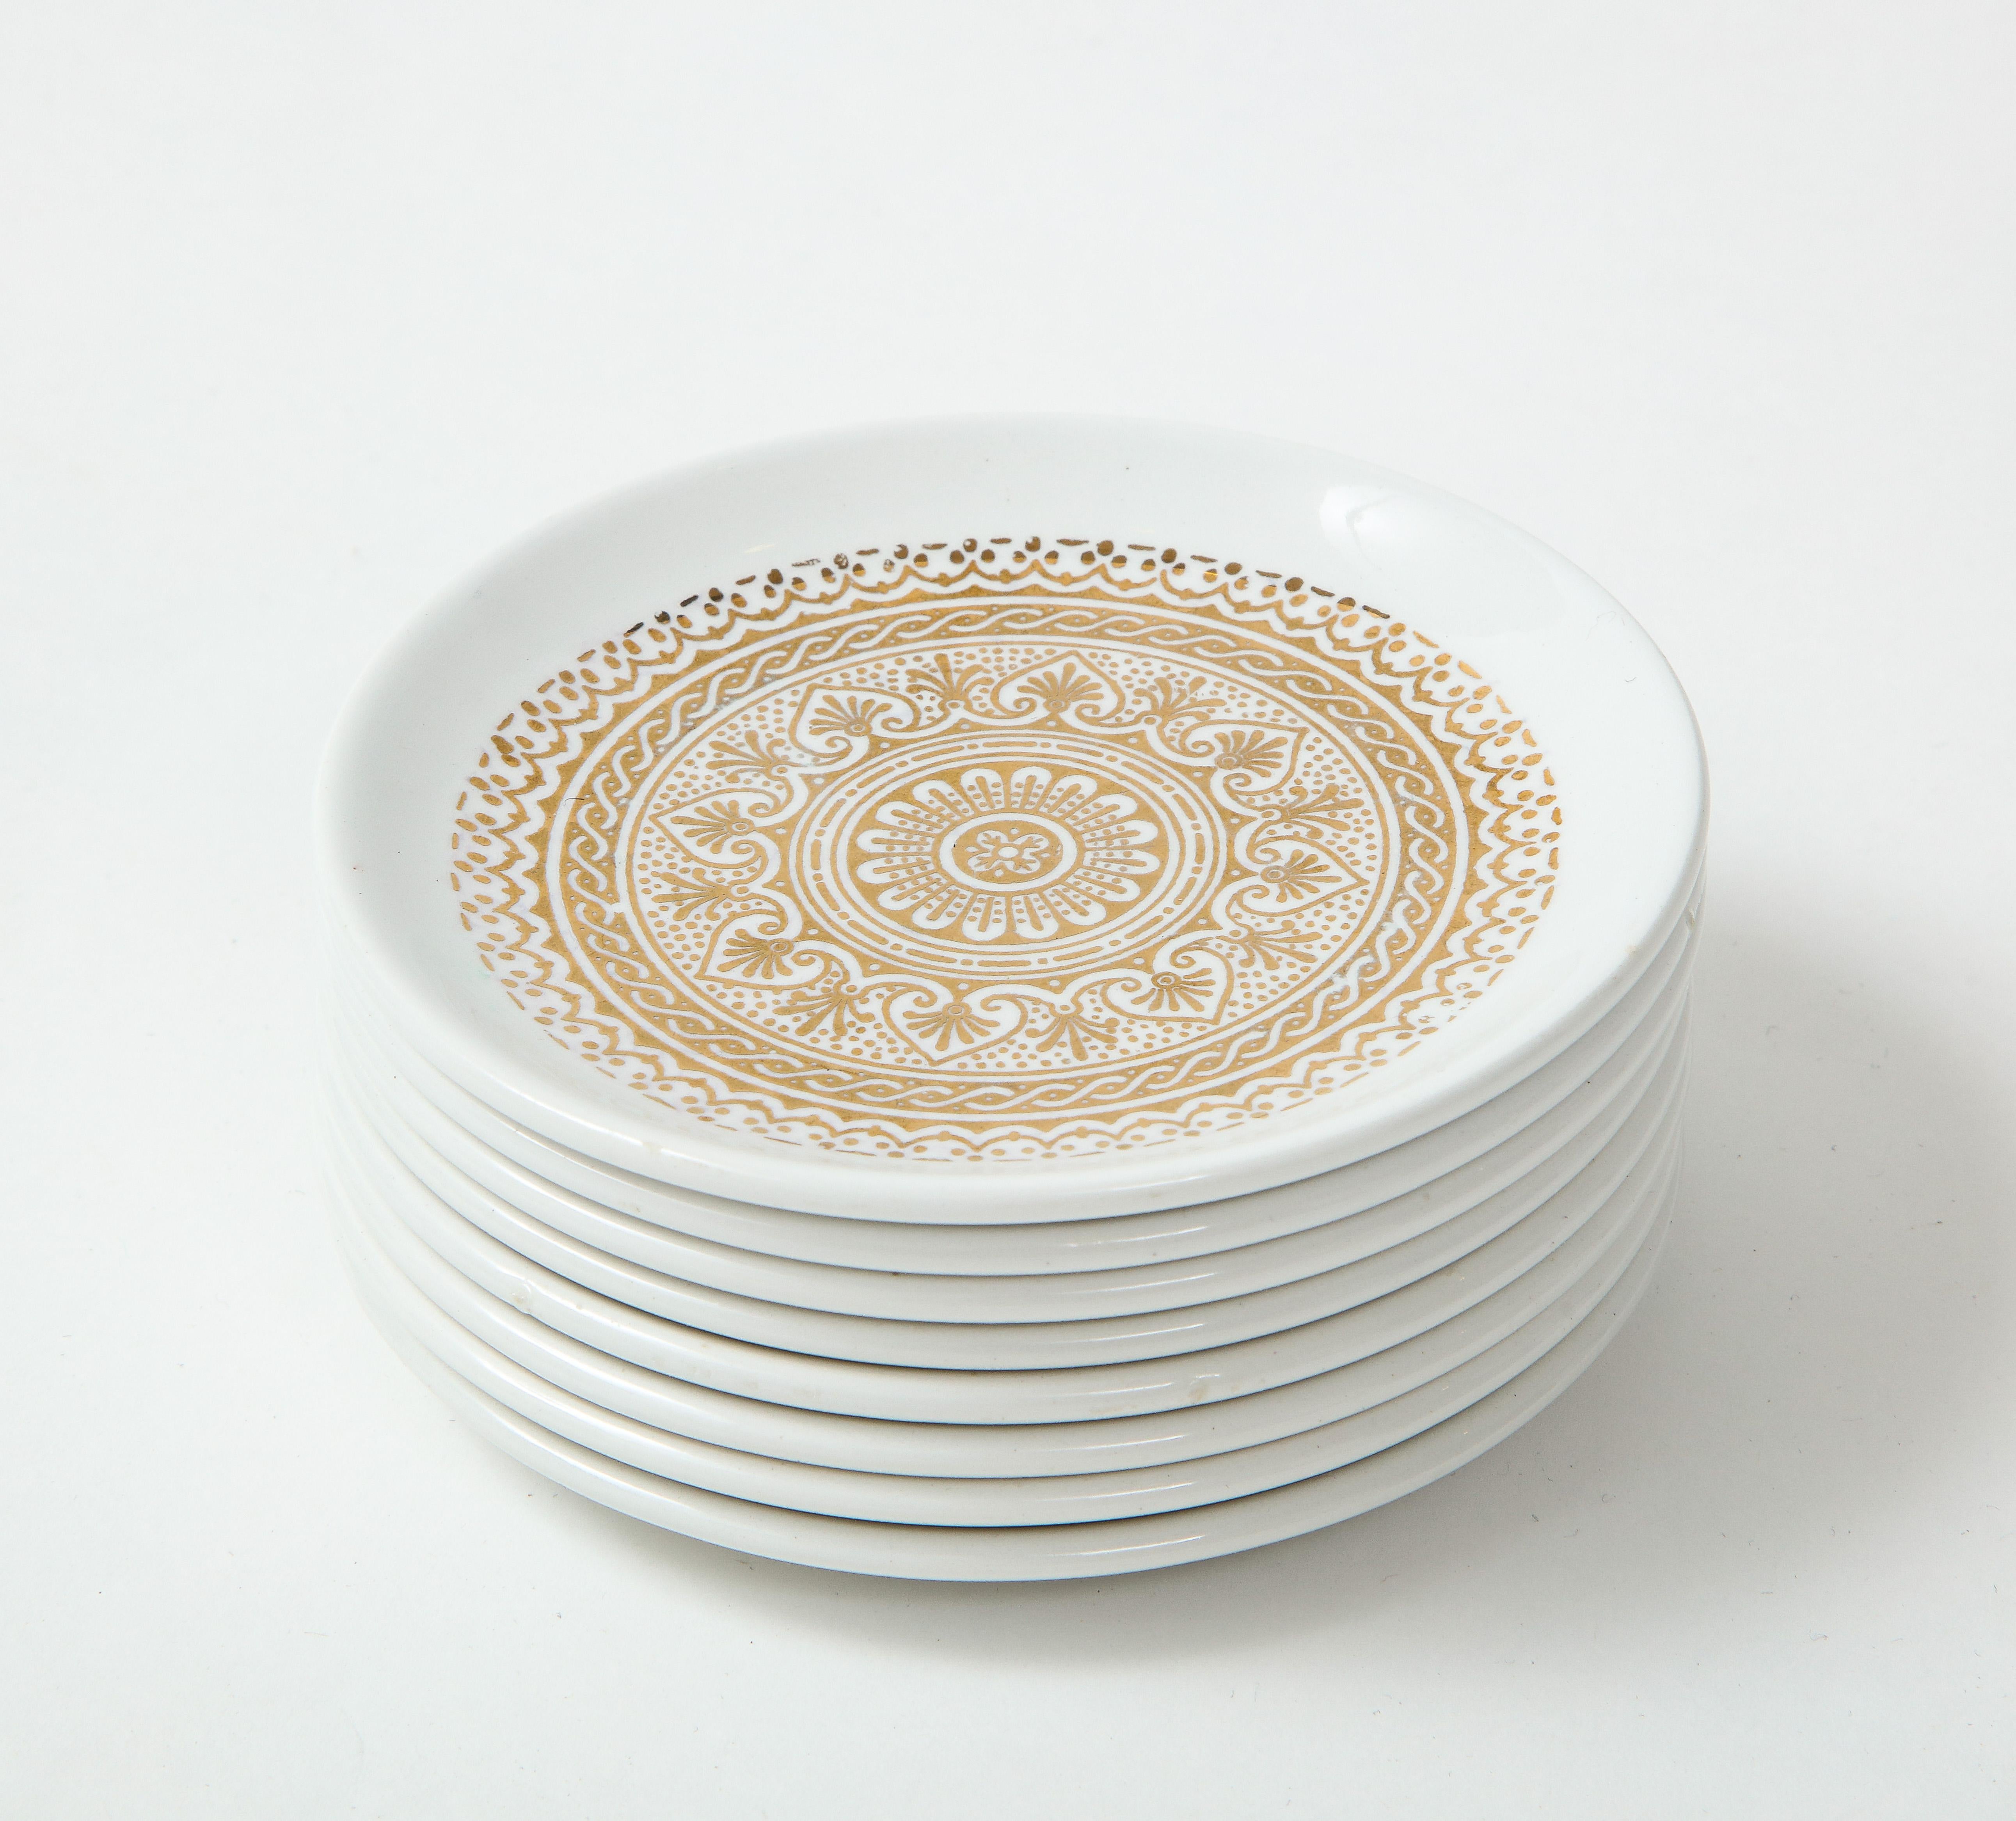 Bucciarelli Gilt Porcelain Plates In Good Condition For Sale In New York, NY